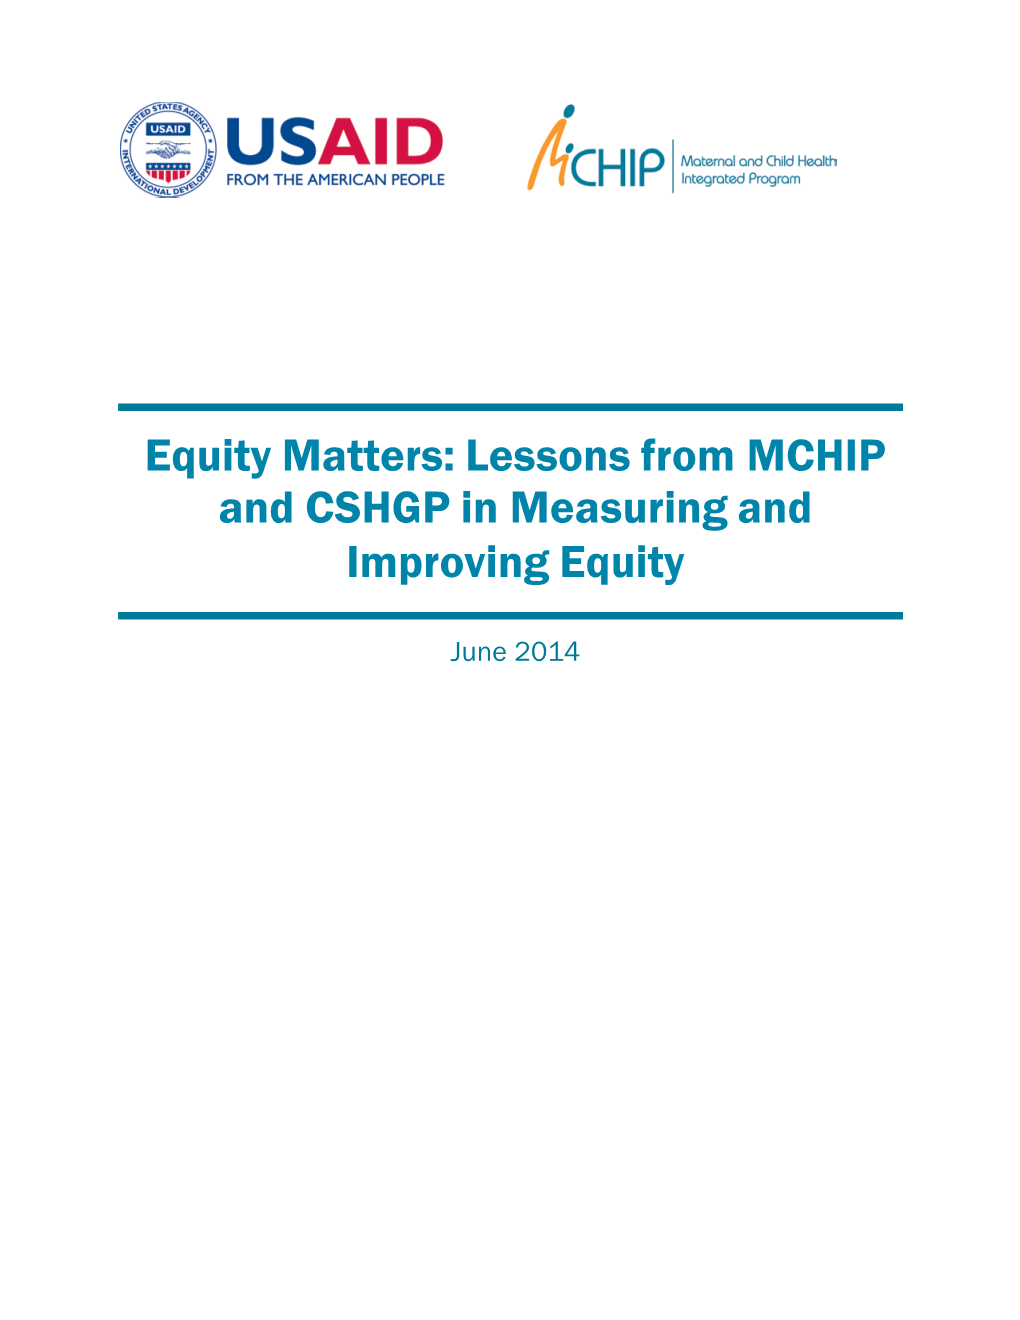 Equity Matters: Lessons from MCHIP and CSHGP in Measuring and Improving Equity